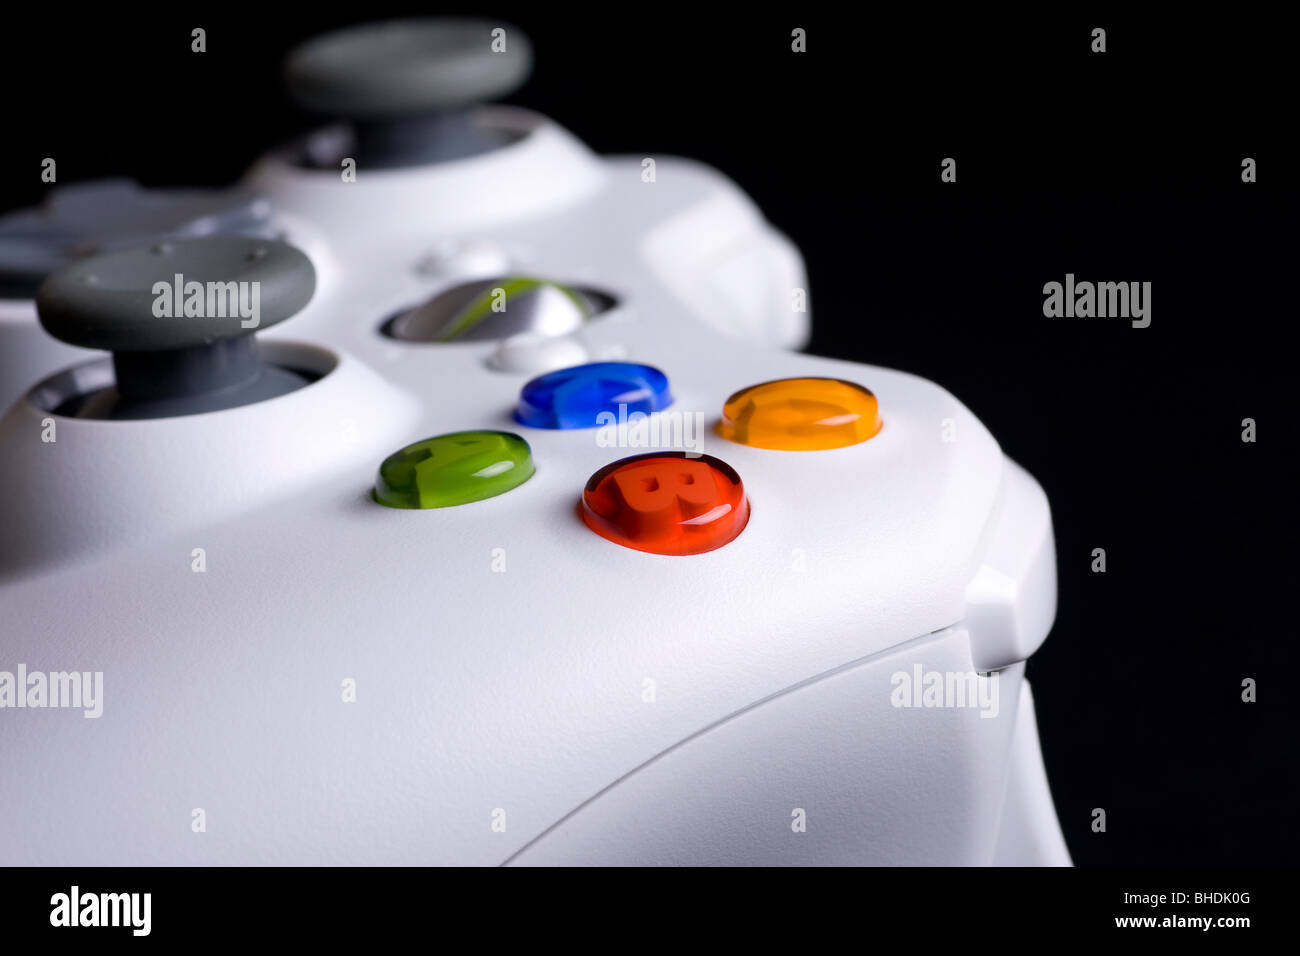 Xbox 360 controller main XYAB button on a black background Stock Photo